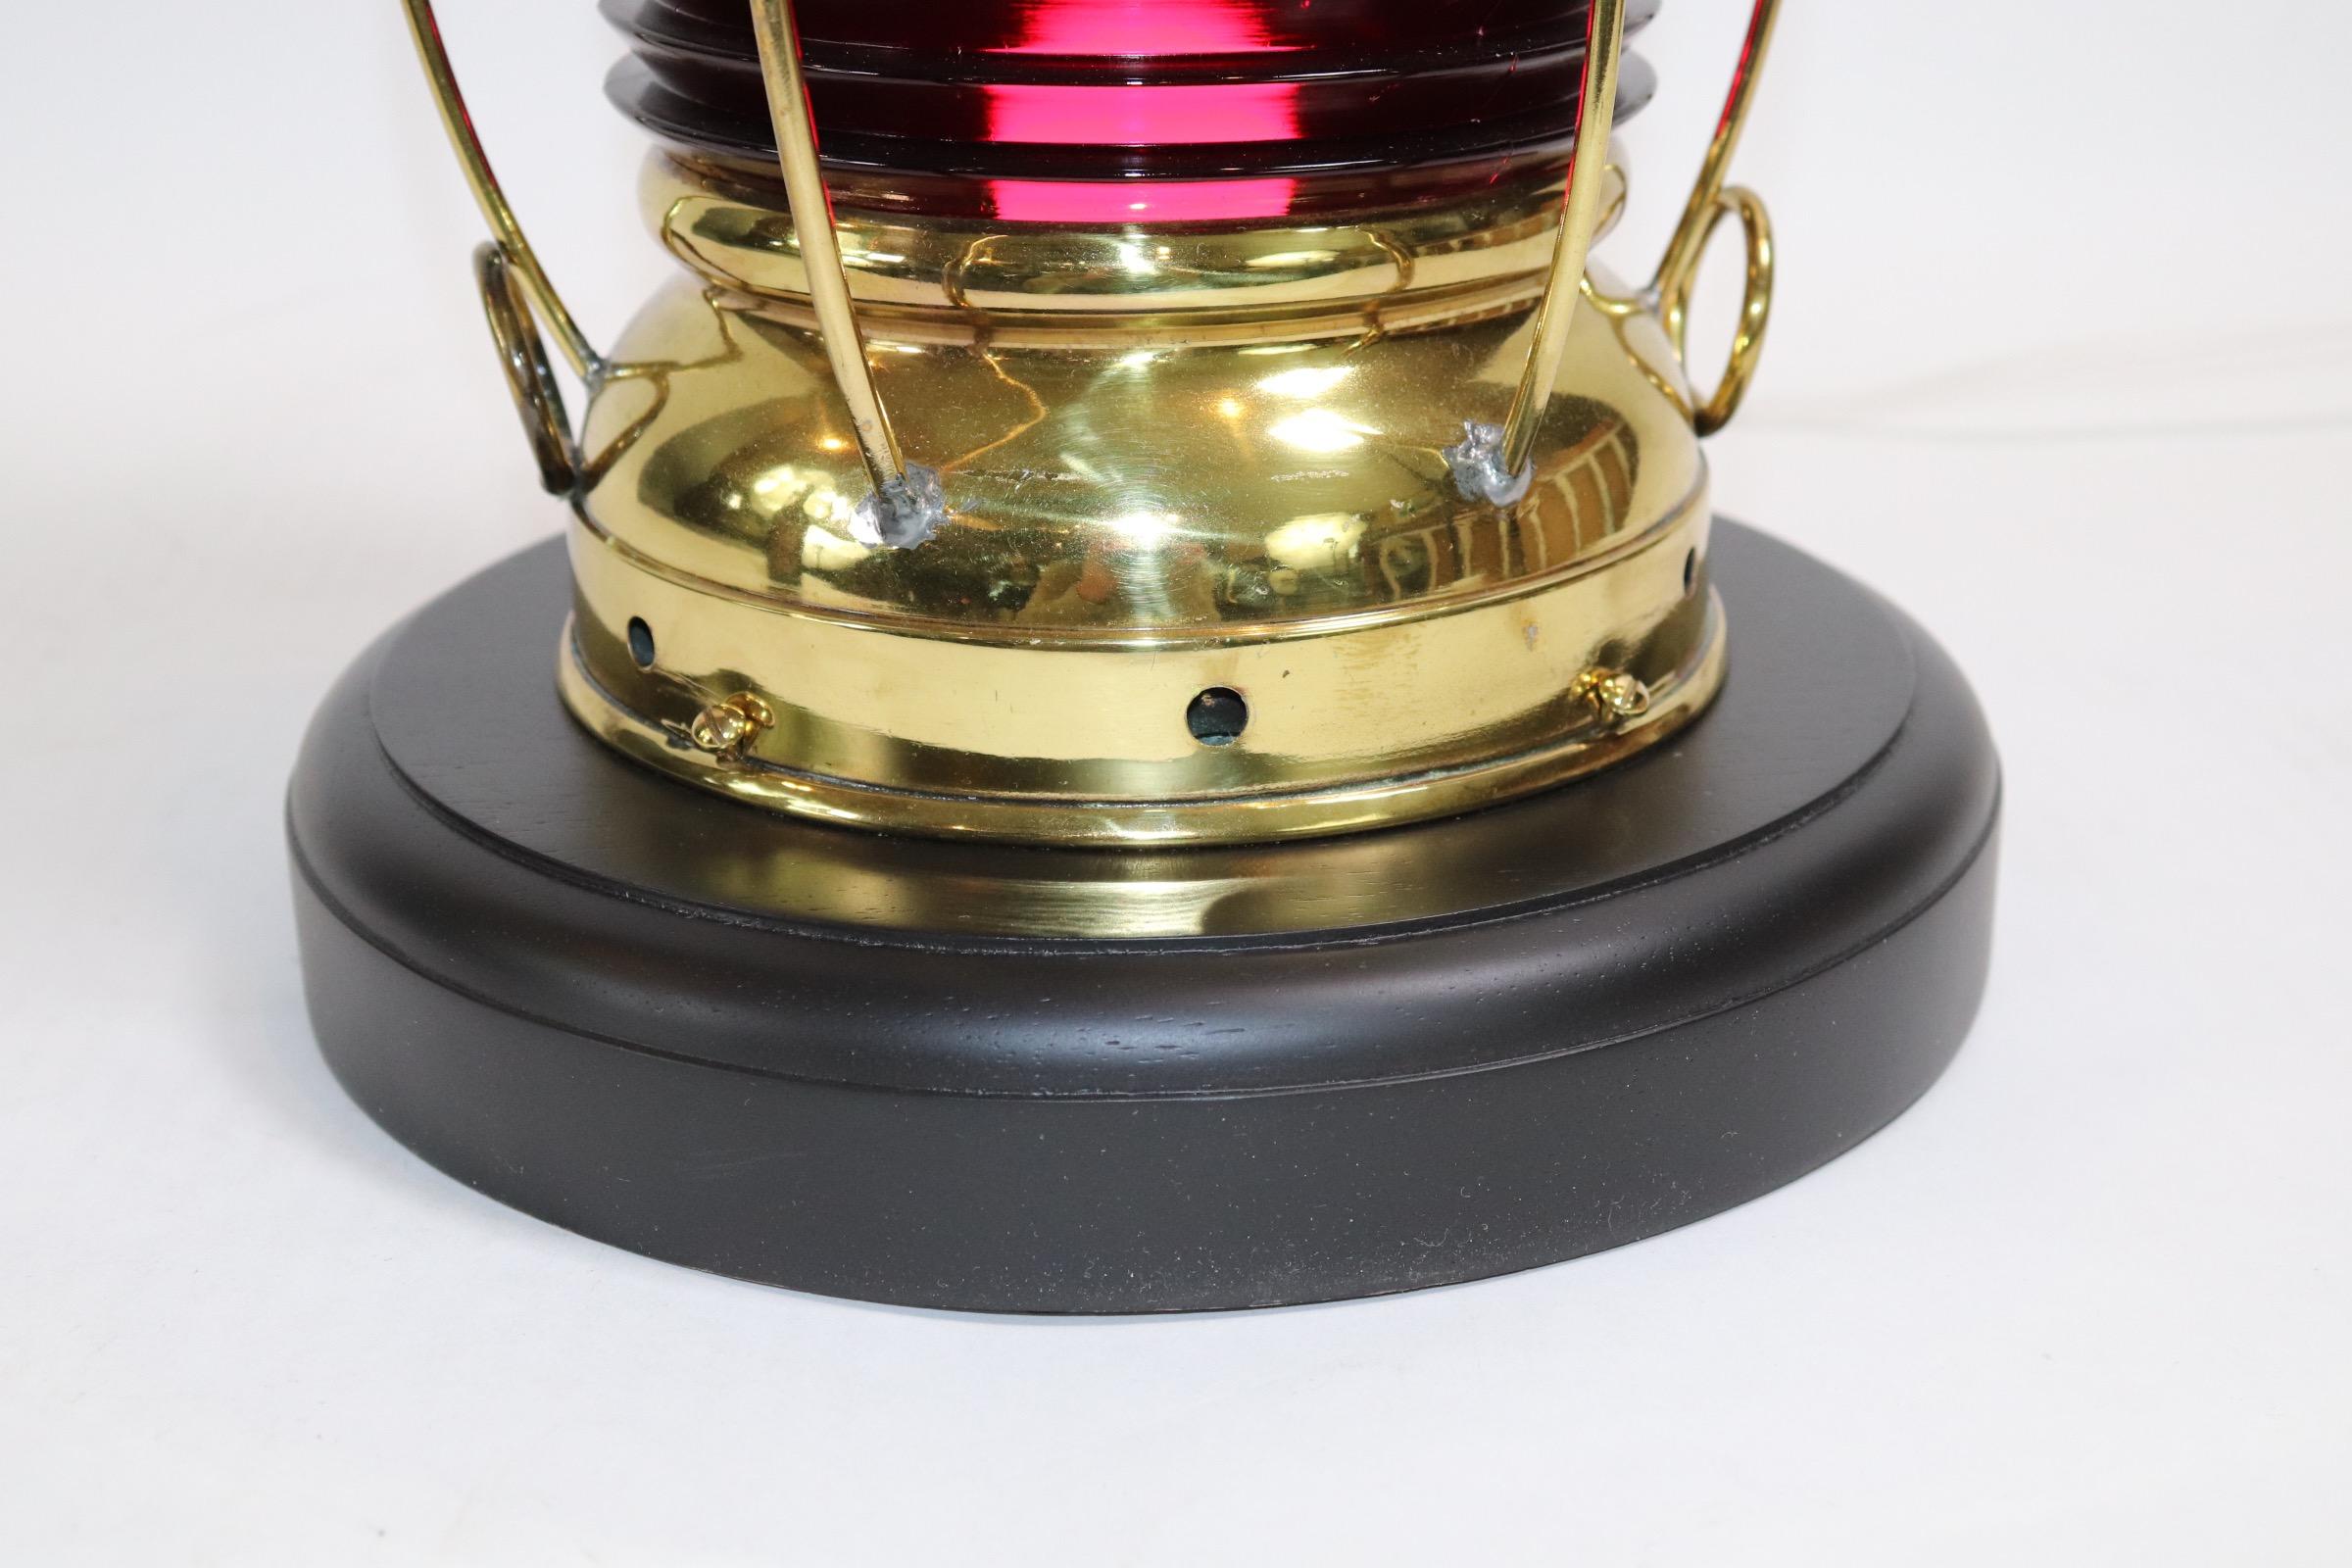 19th century solid brass ships lantern with highly polished and lacquered finish, rich ruby red lens and custom made wood base with rich dark finish. Wired for home display. Weight is 9 pounds.